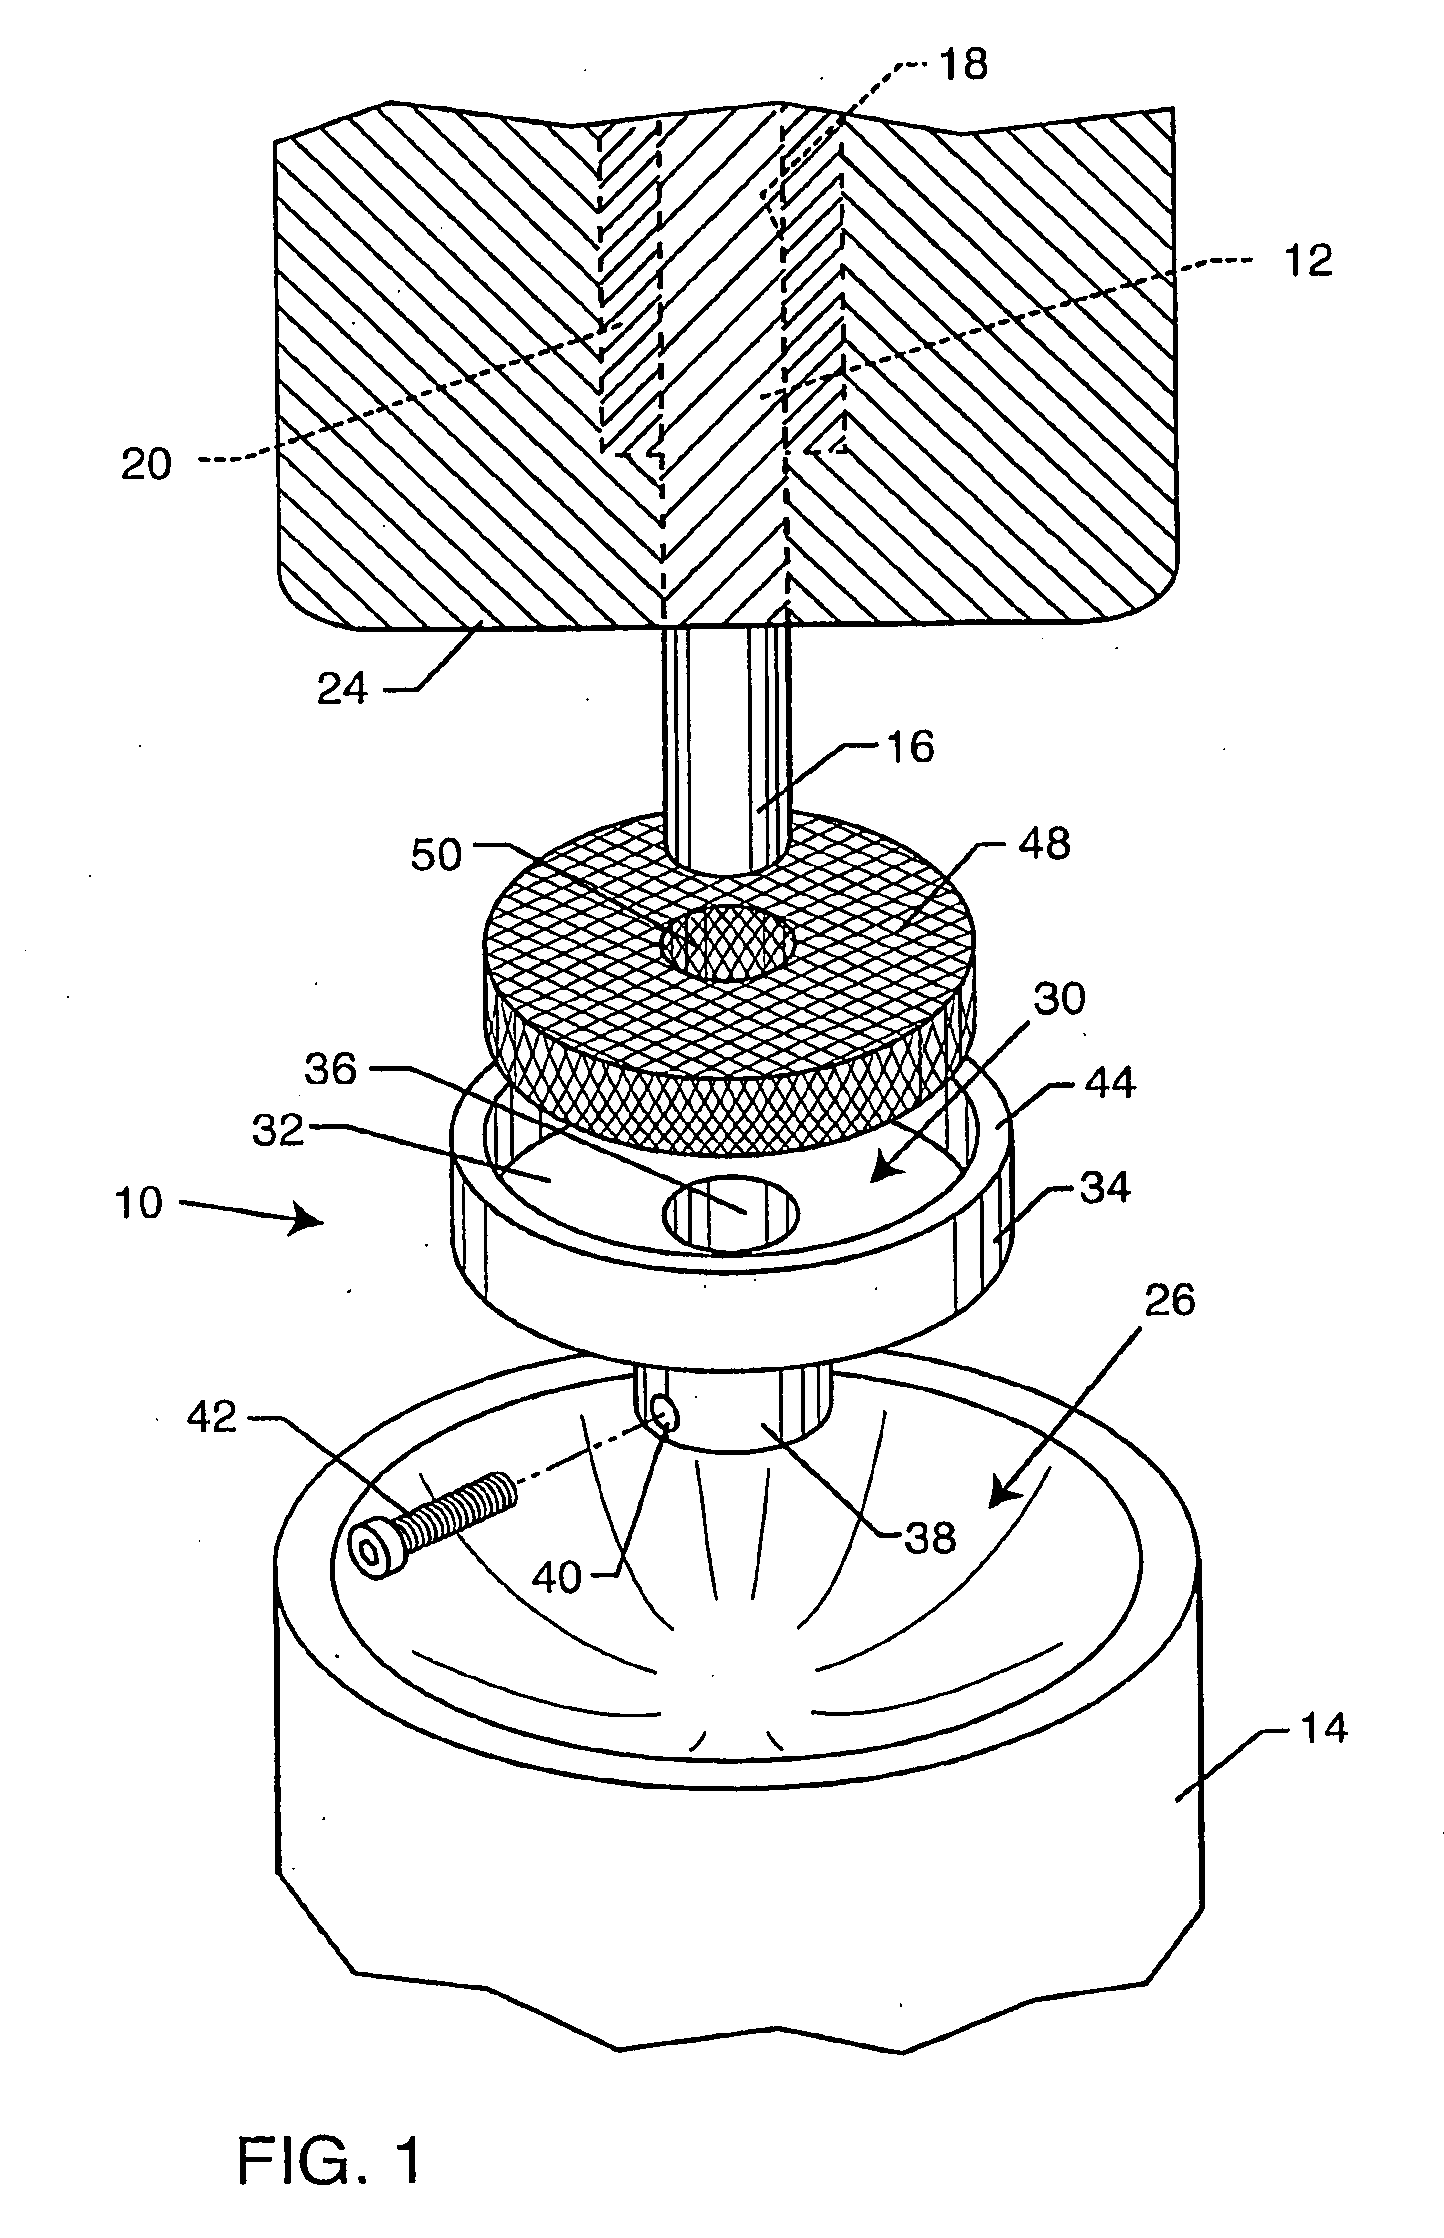 Antimicrobial Containment Cap For a Bone Anchored Prosthesis Mounting